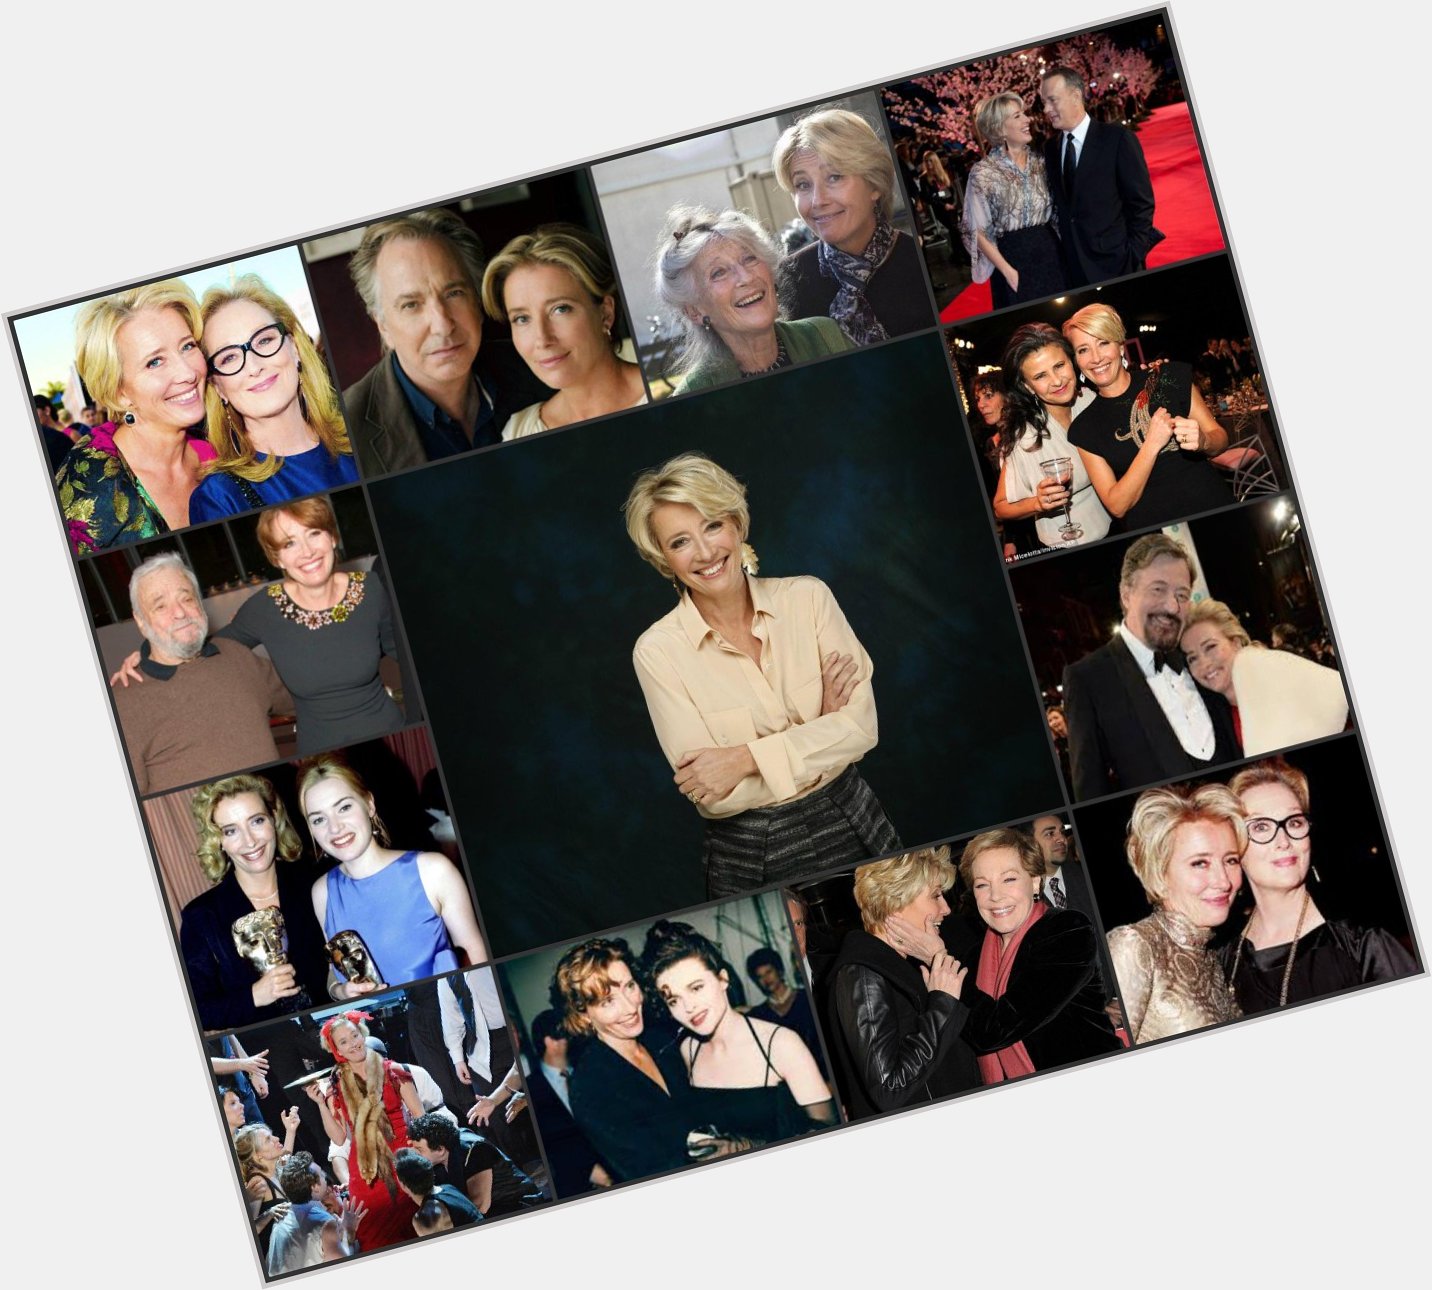 Happy(early) birthday to one of my personal heroes-the ridiculously talented EMMA THOMPSON 